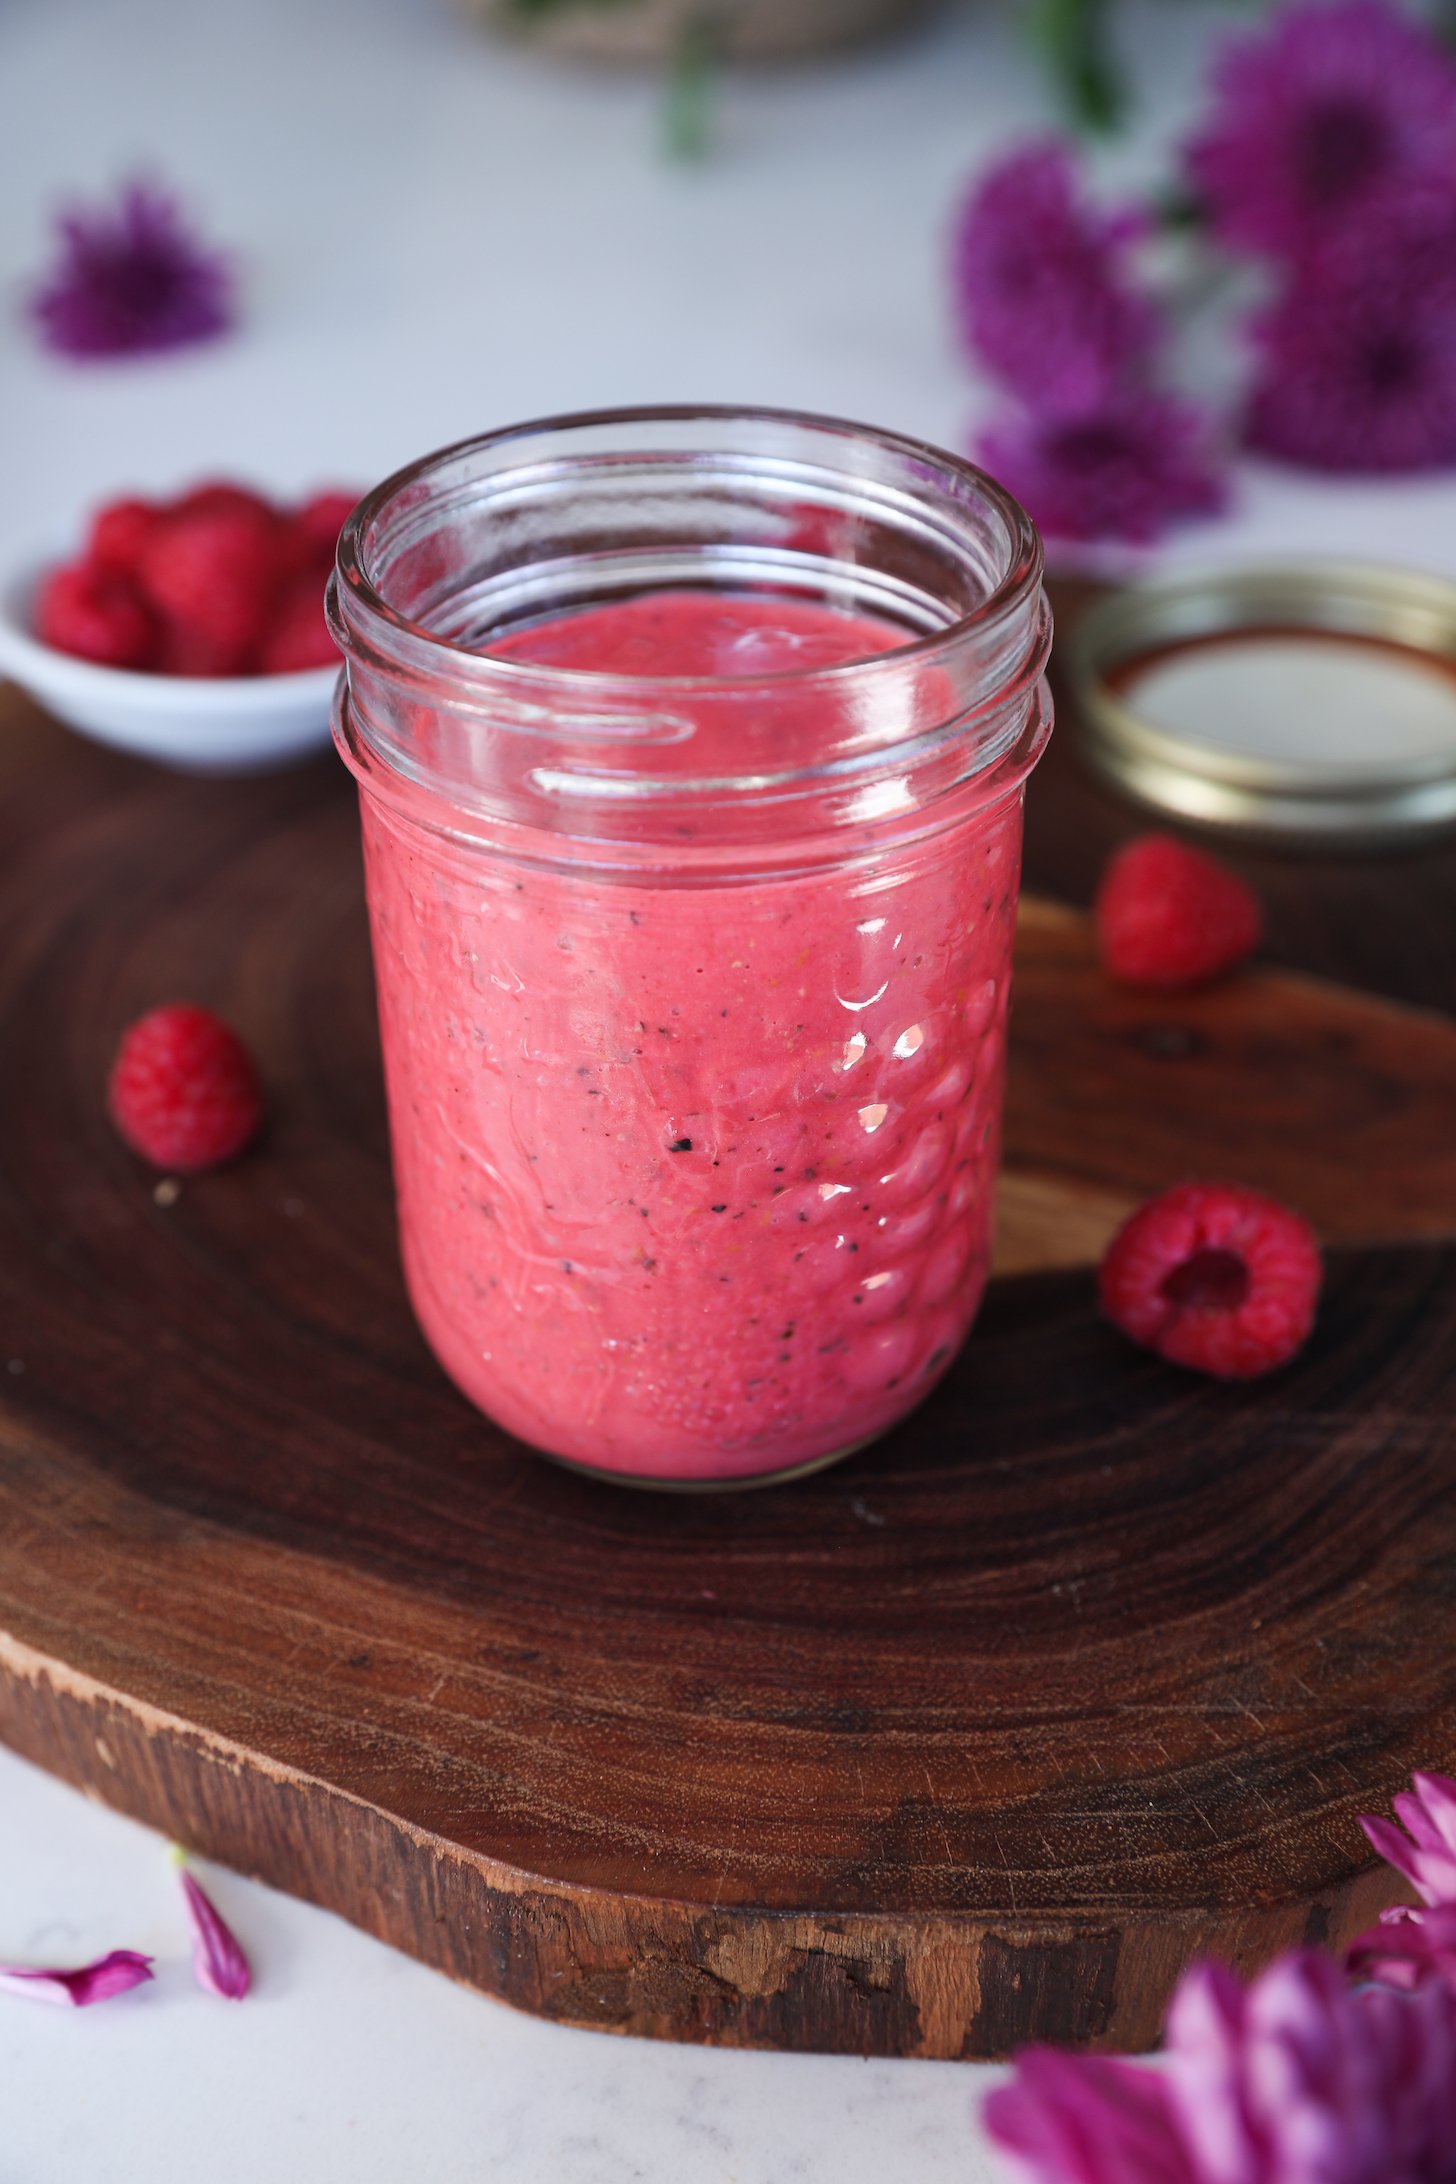 A mason jar of red sauce or dressing on a wooden board surrounded by scattered raspberries and flowers.